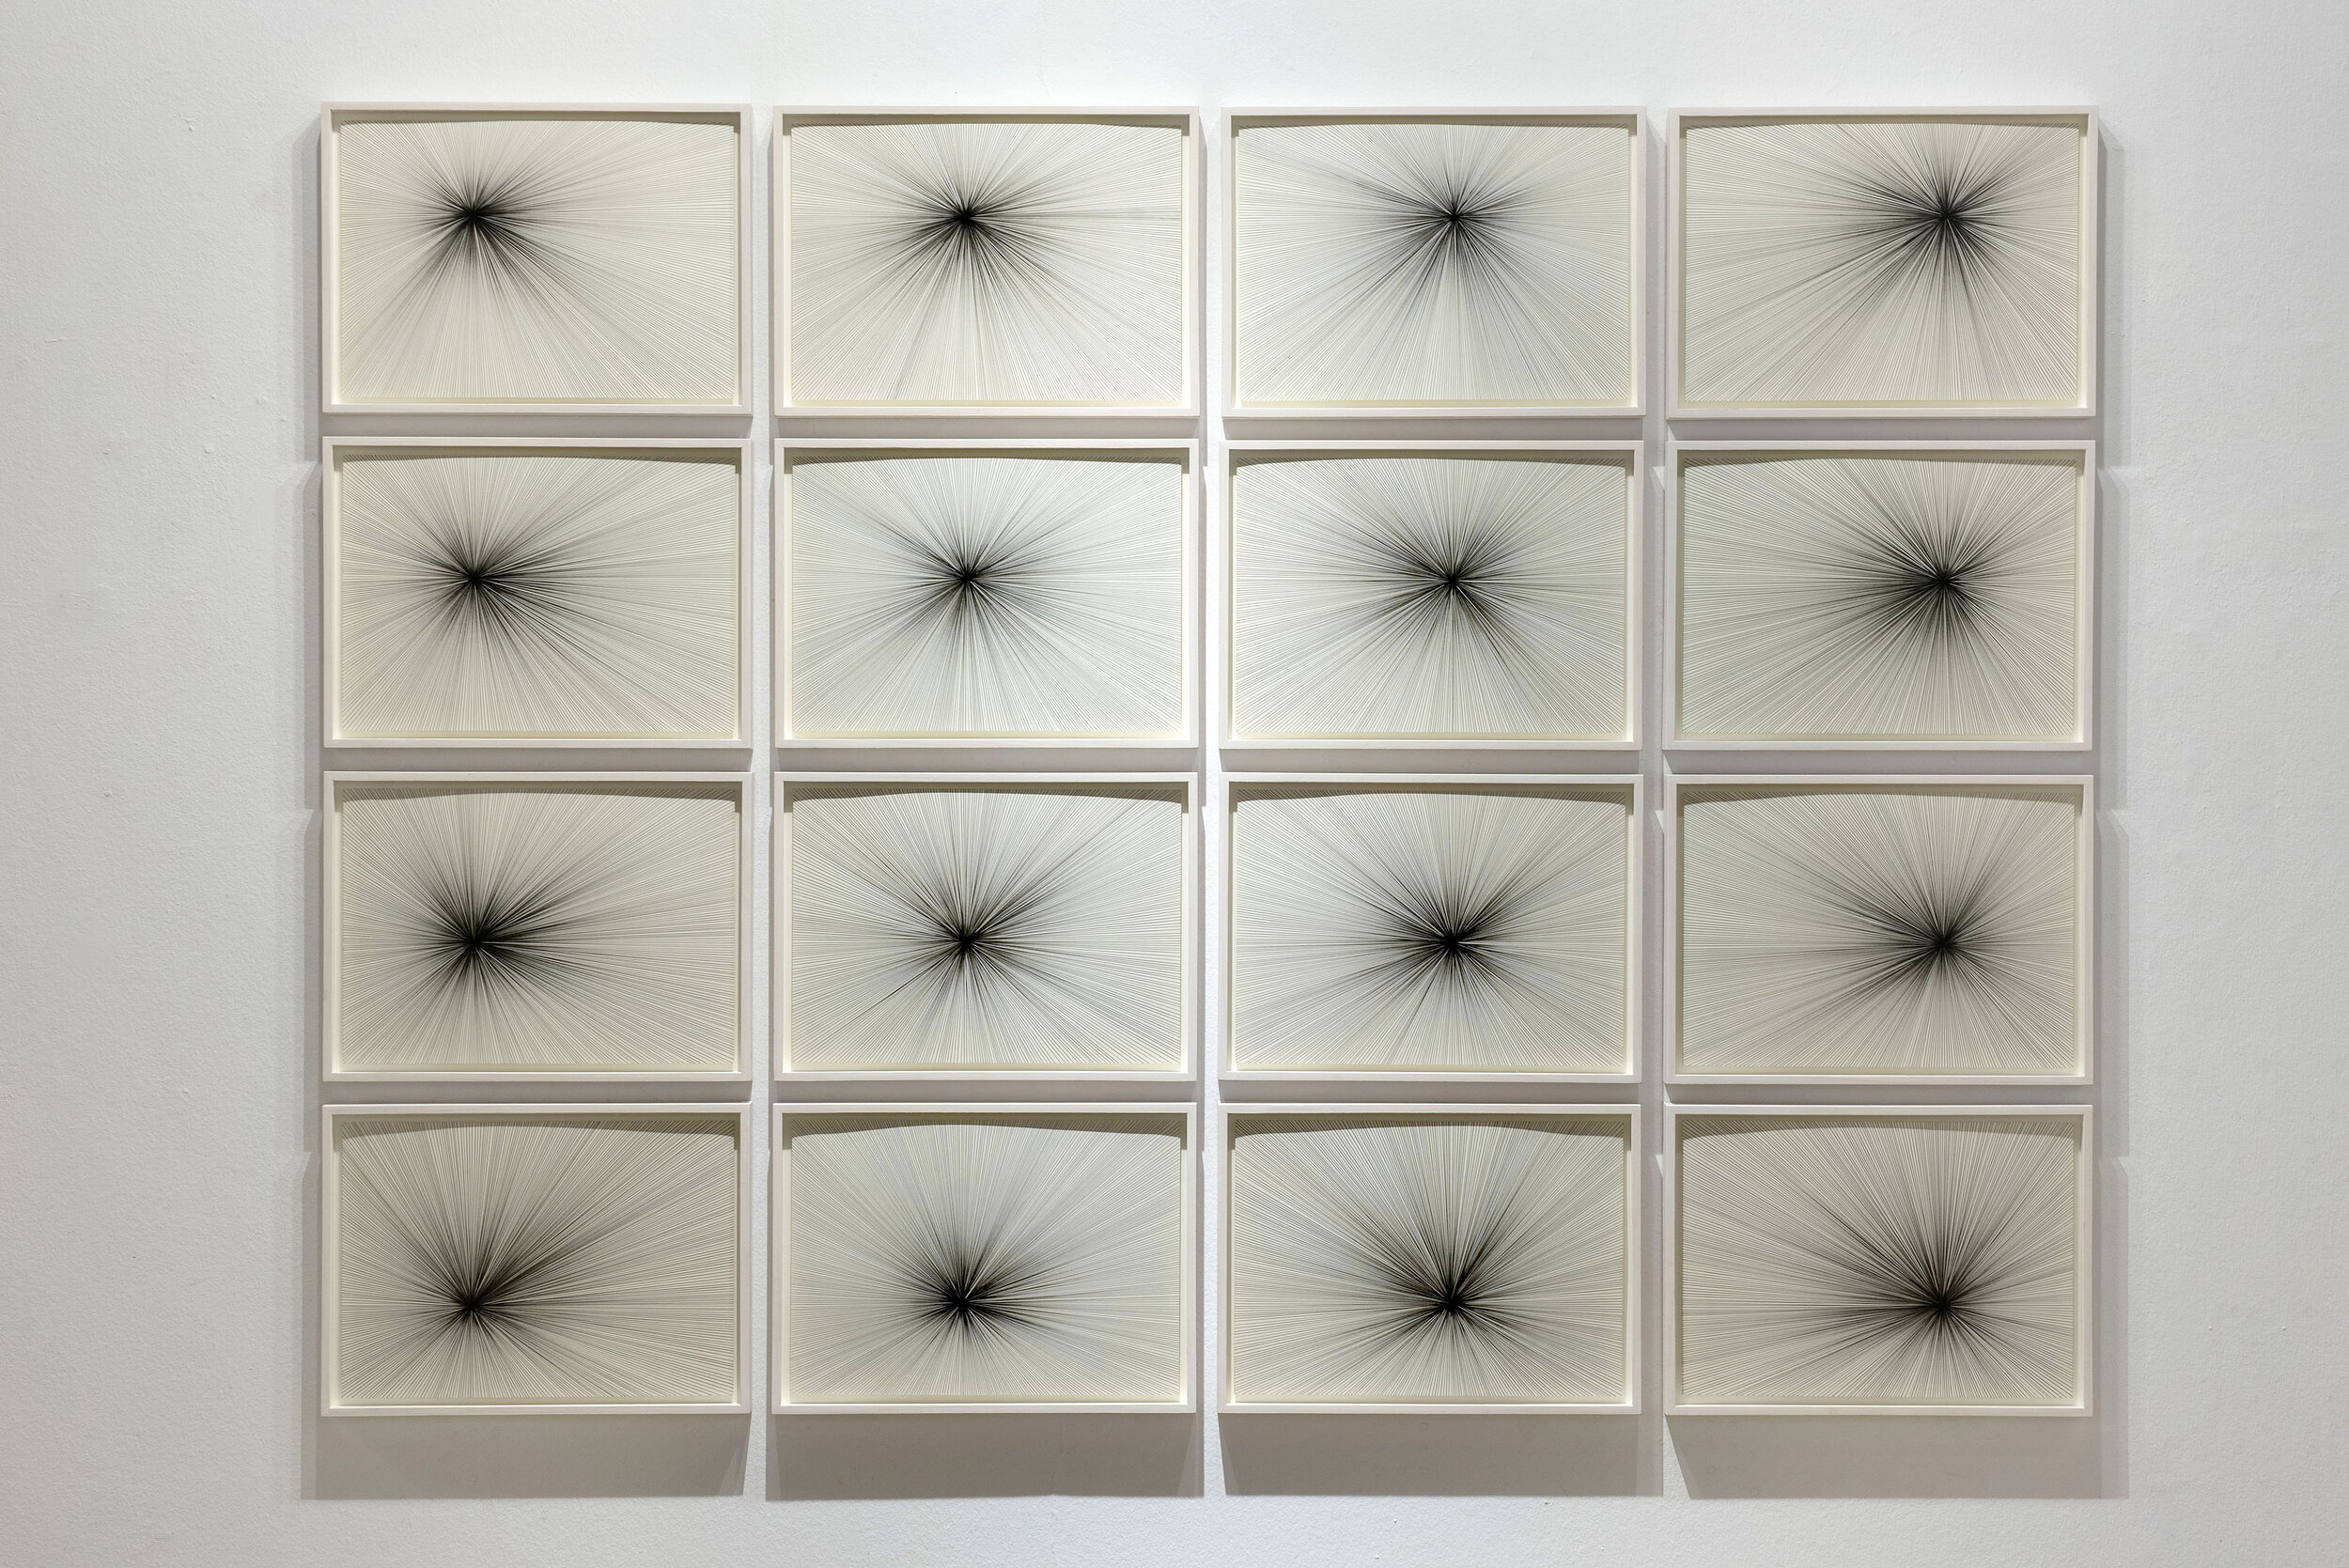   “Negative light matrix (4x4)”, 2019  Pigmented ink on paper, 16 drawings, 42 x 29,7 cm 